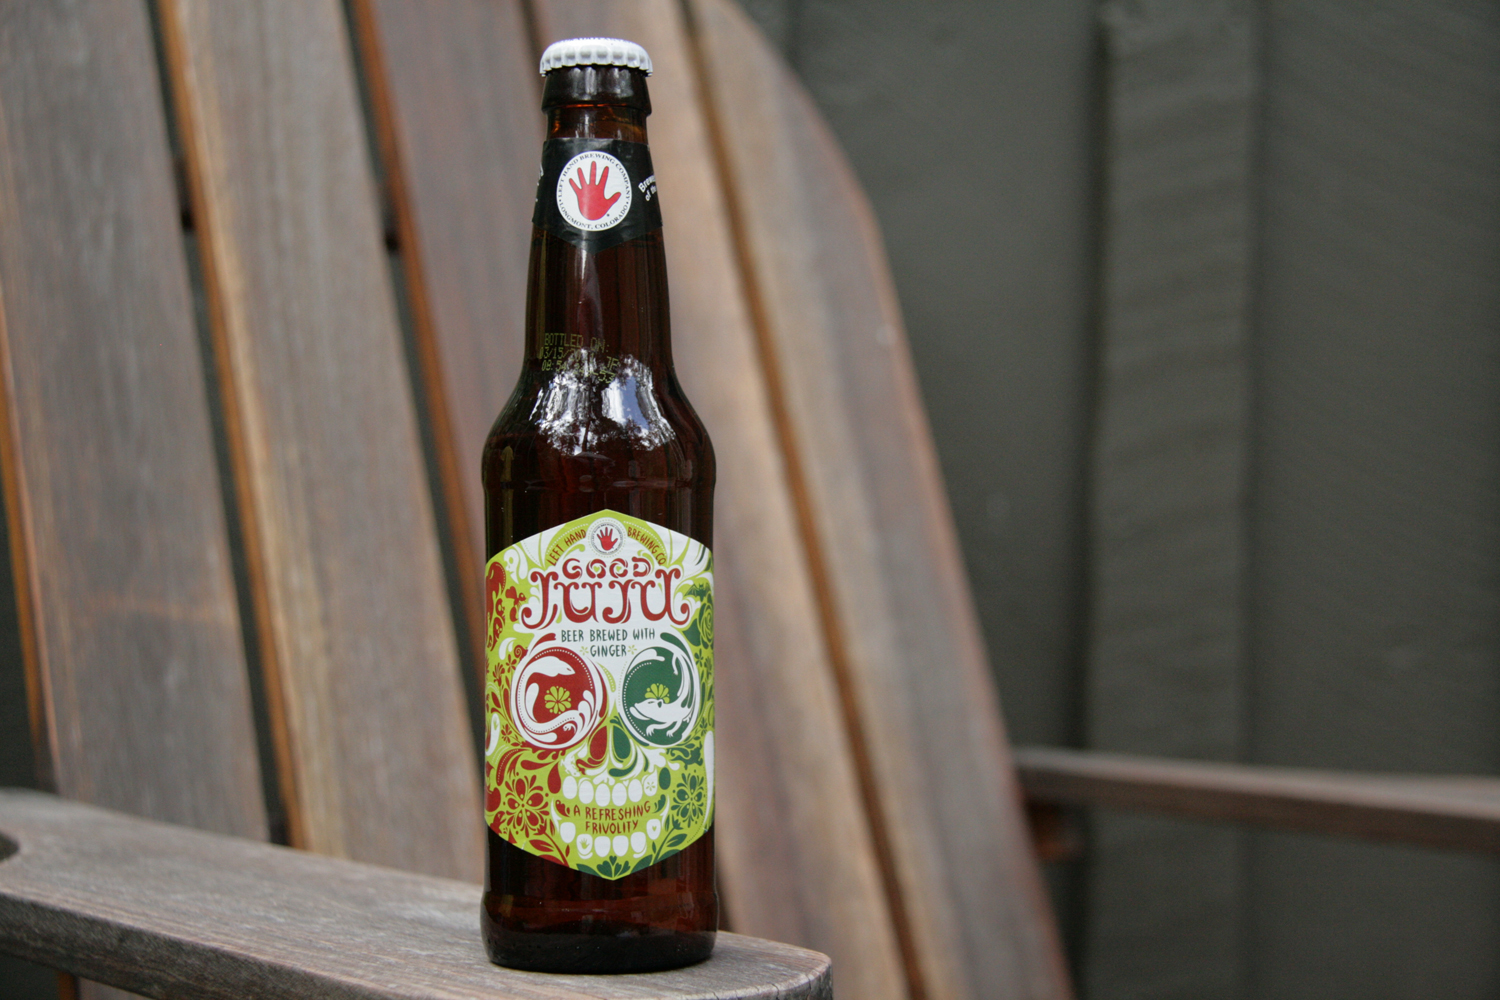 Good Juju summer ginger beer is made with spices.